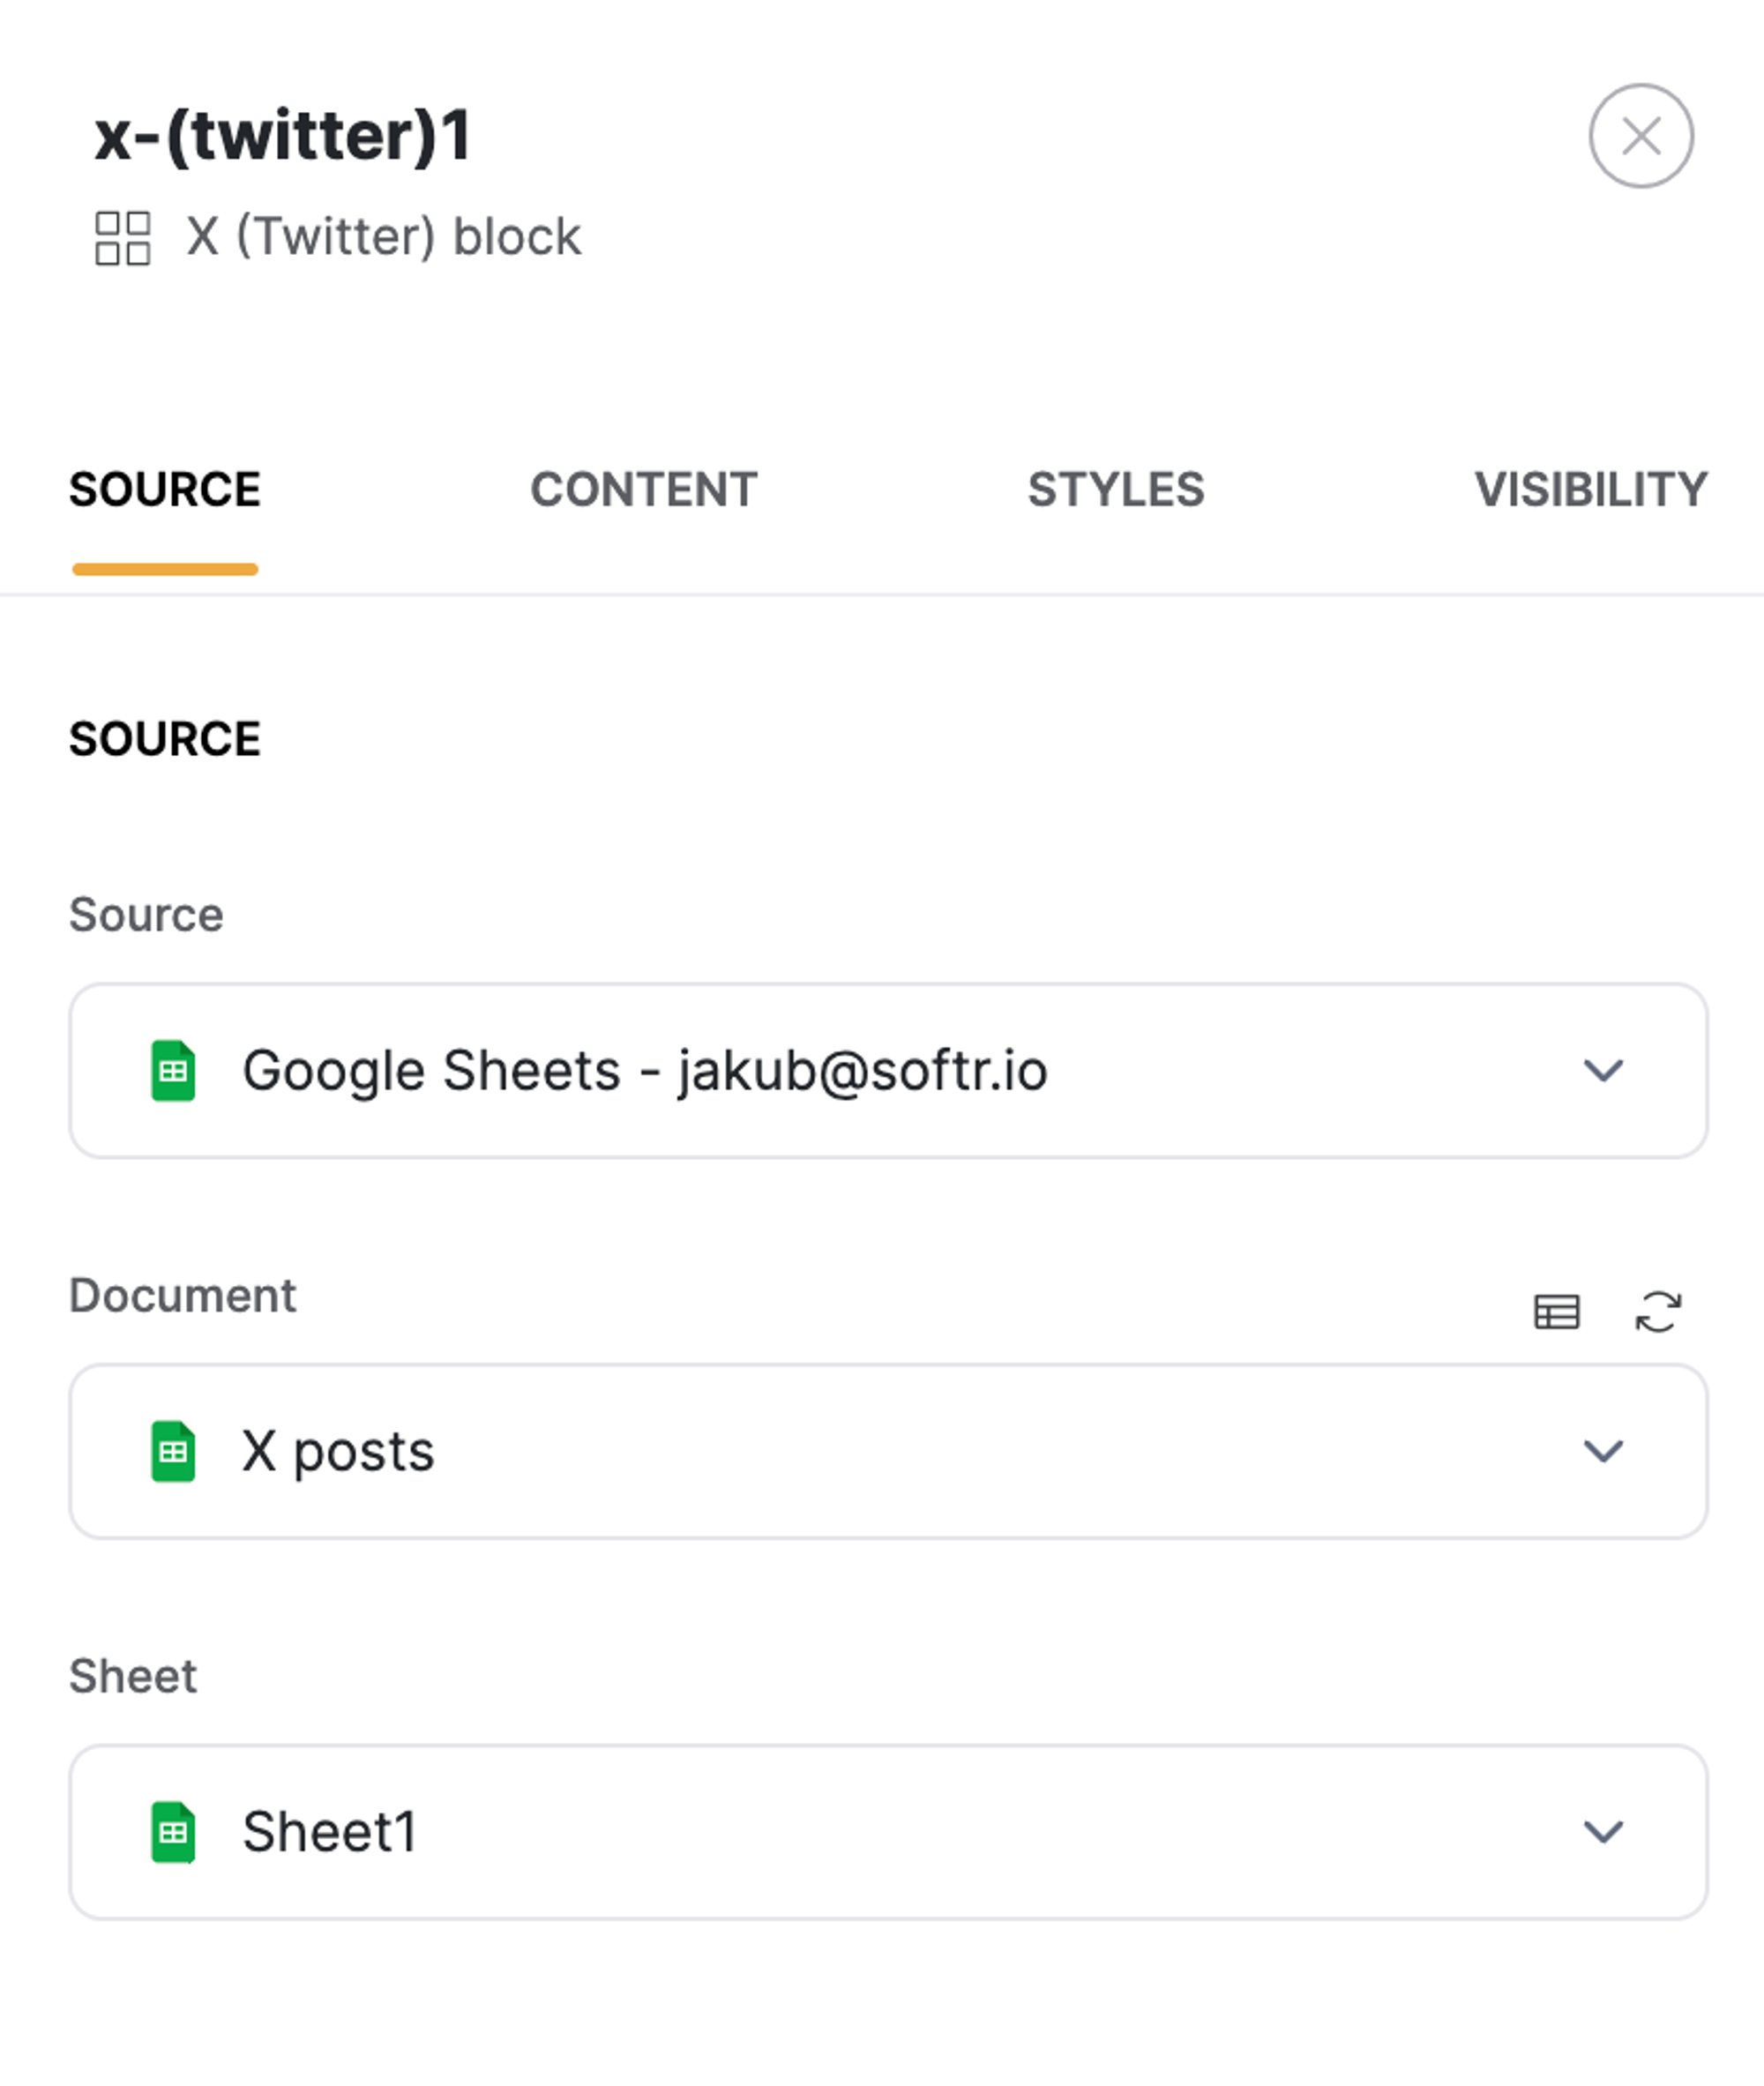 Google Sheets used as source of X posts